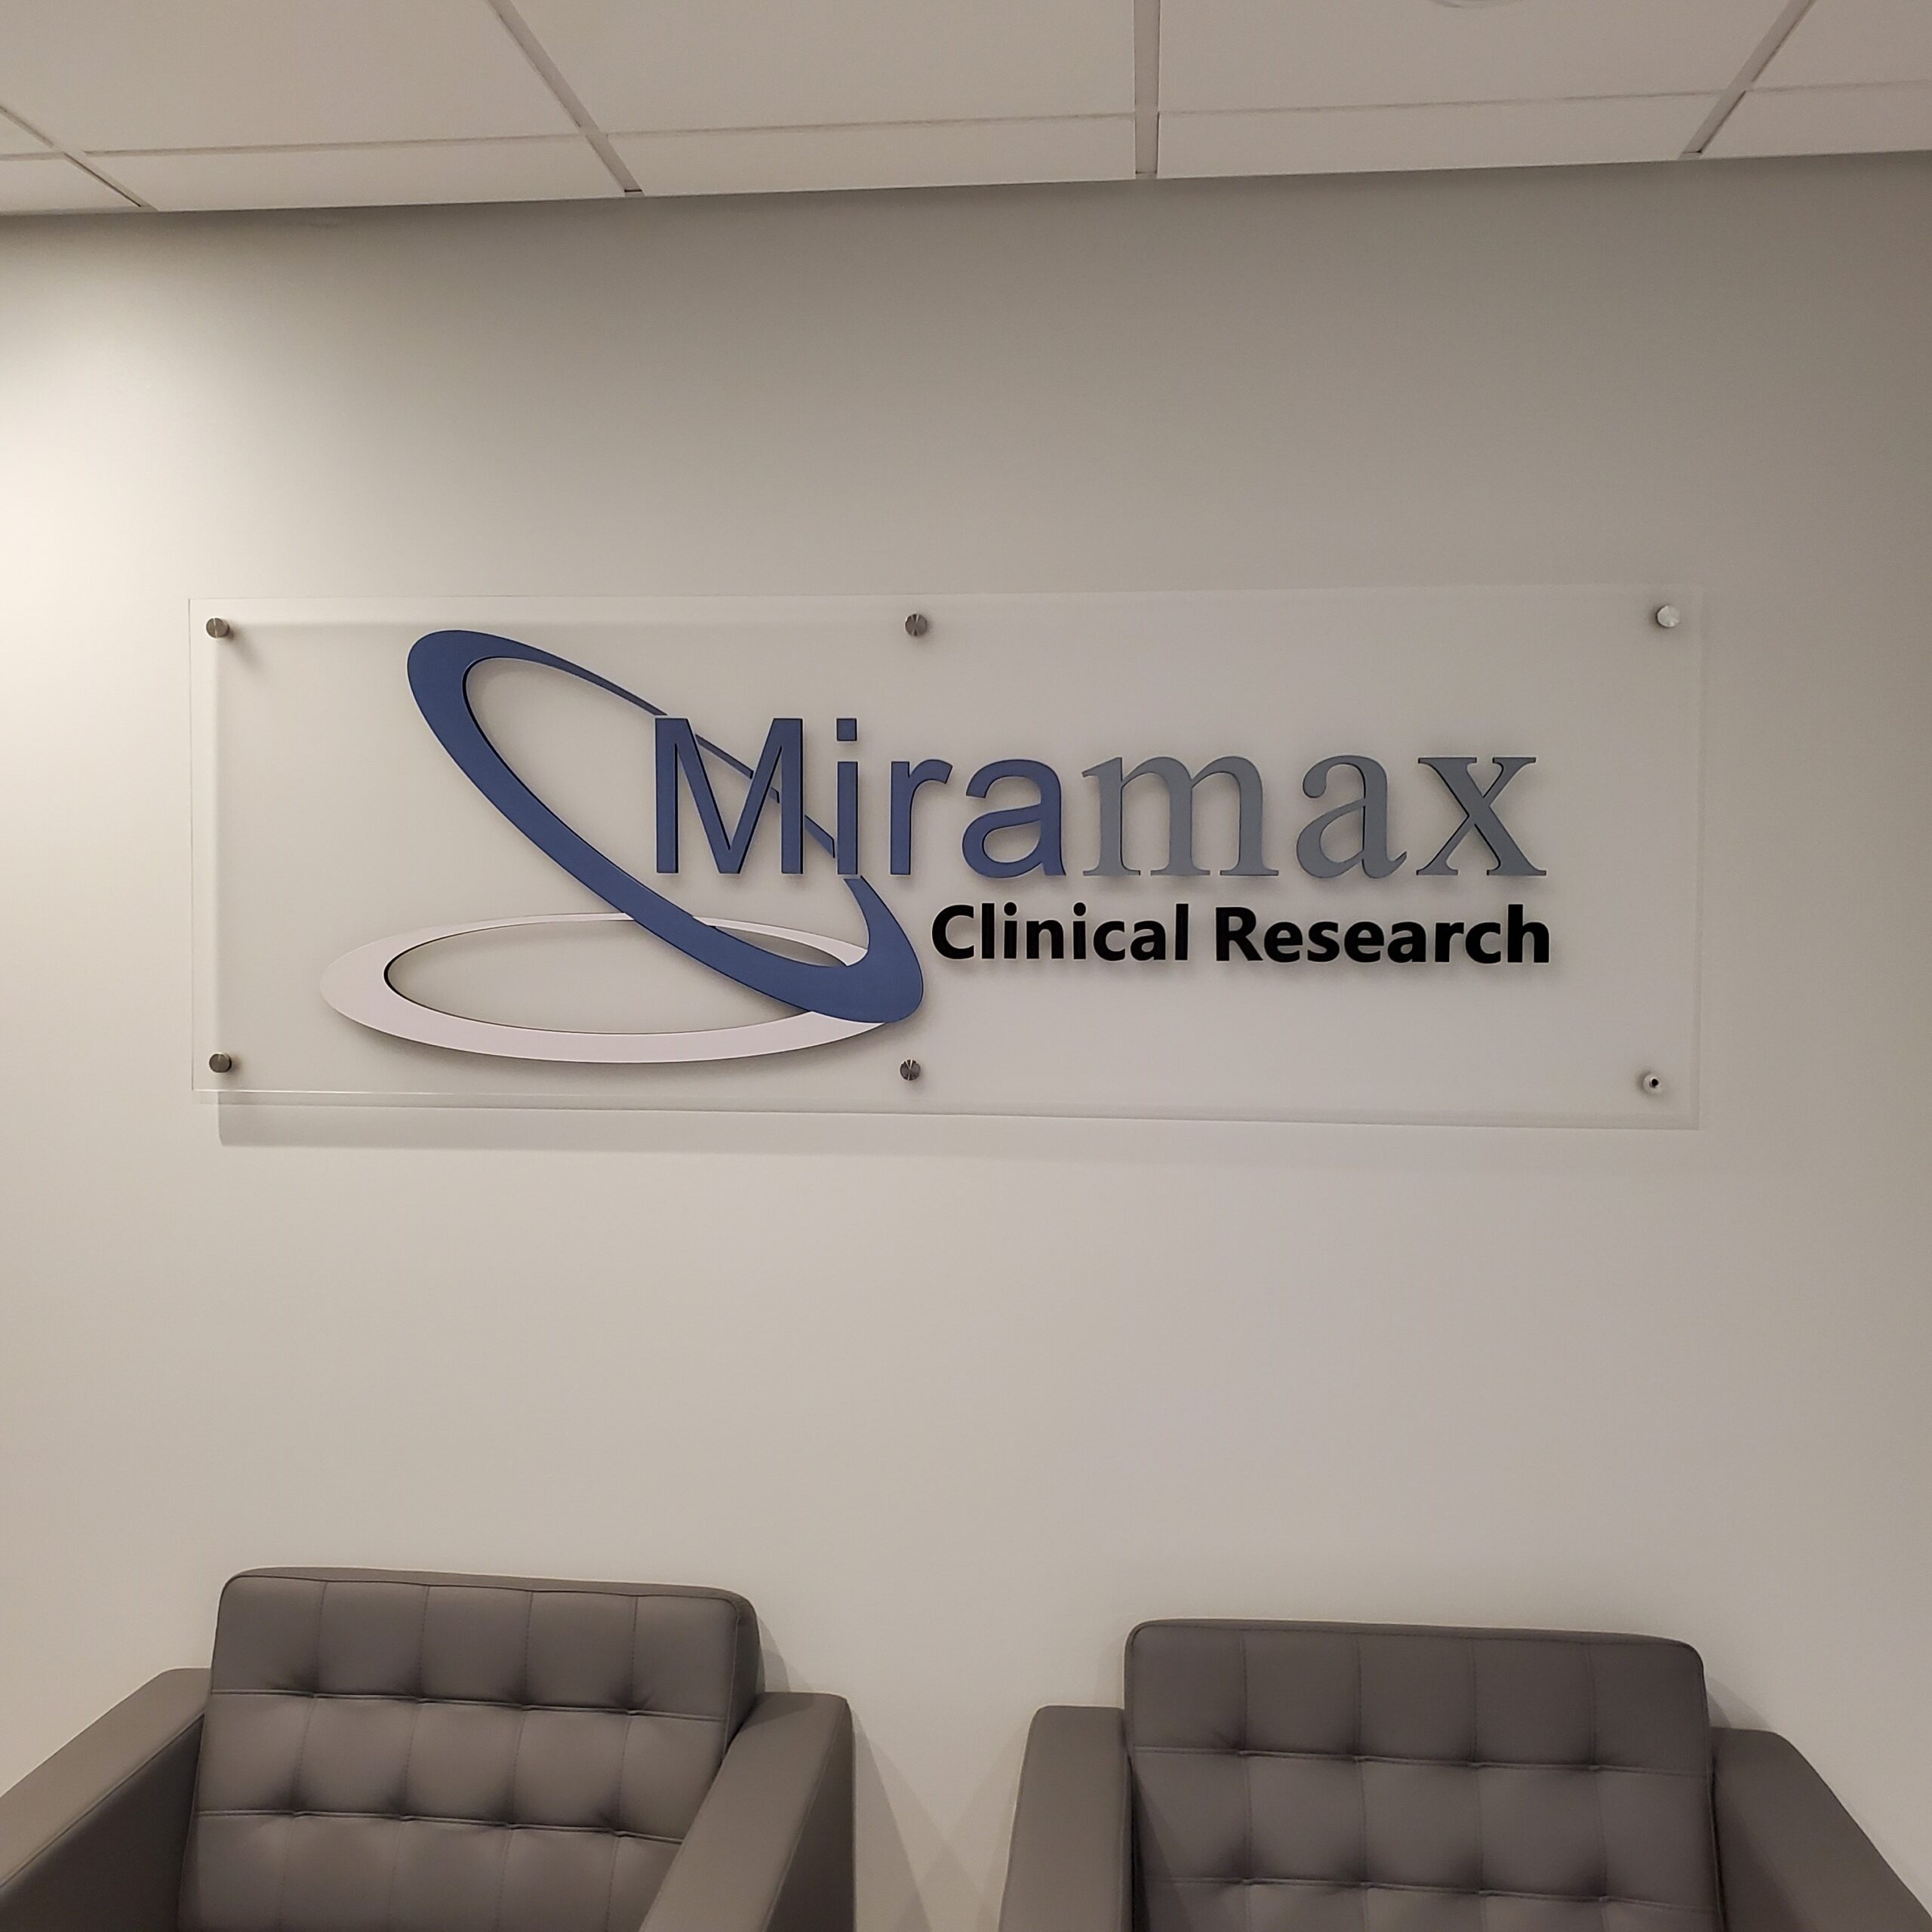 Miramax Clinical Research